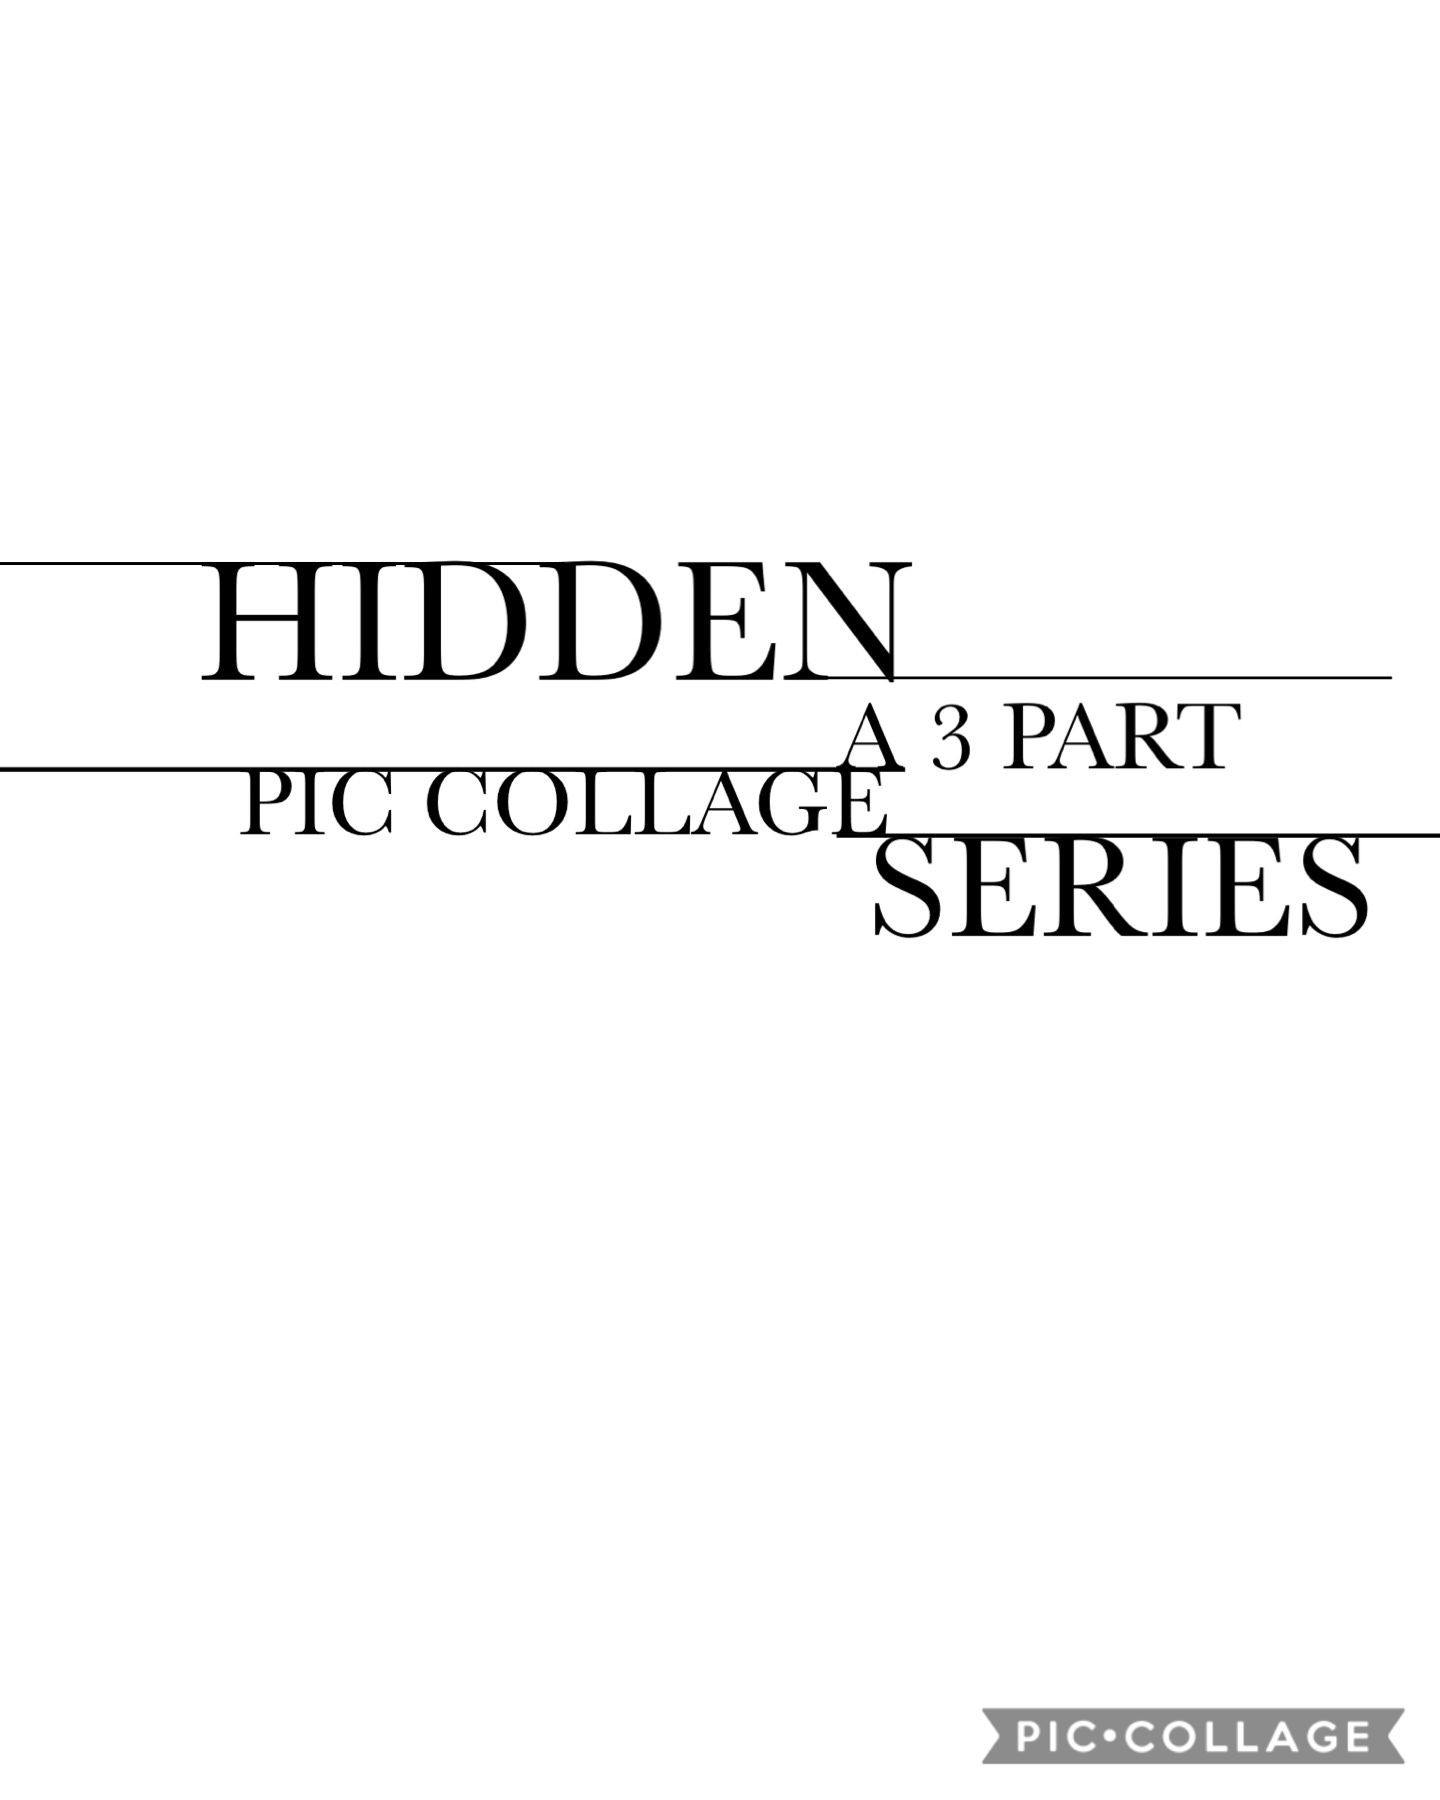 Hey guys! I’ve decided to start a series! It’s called “Hidden” and I’ve been preparing a lot for it. This will go on every other day until the end of the series. Hope u like it!